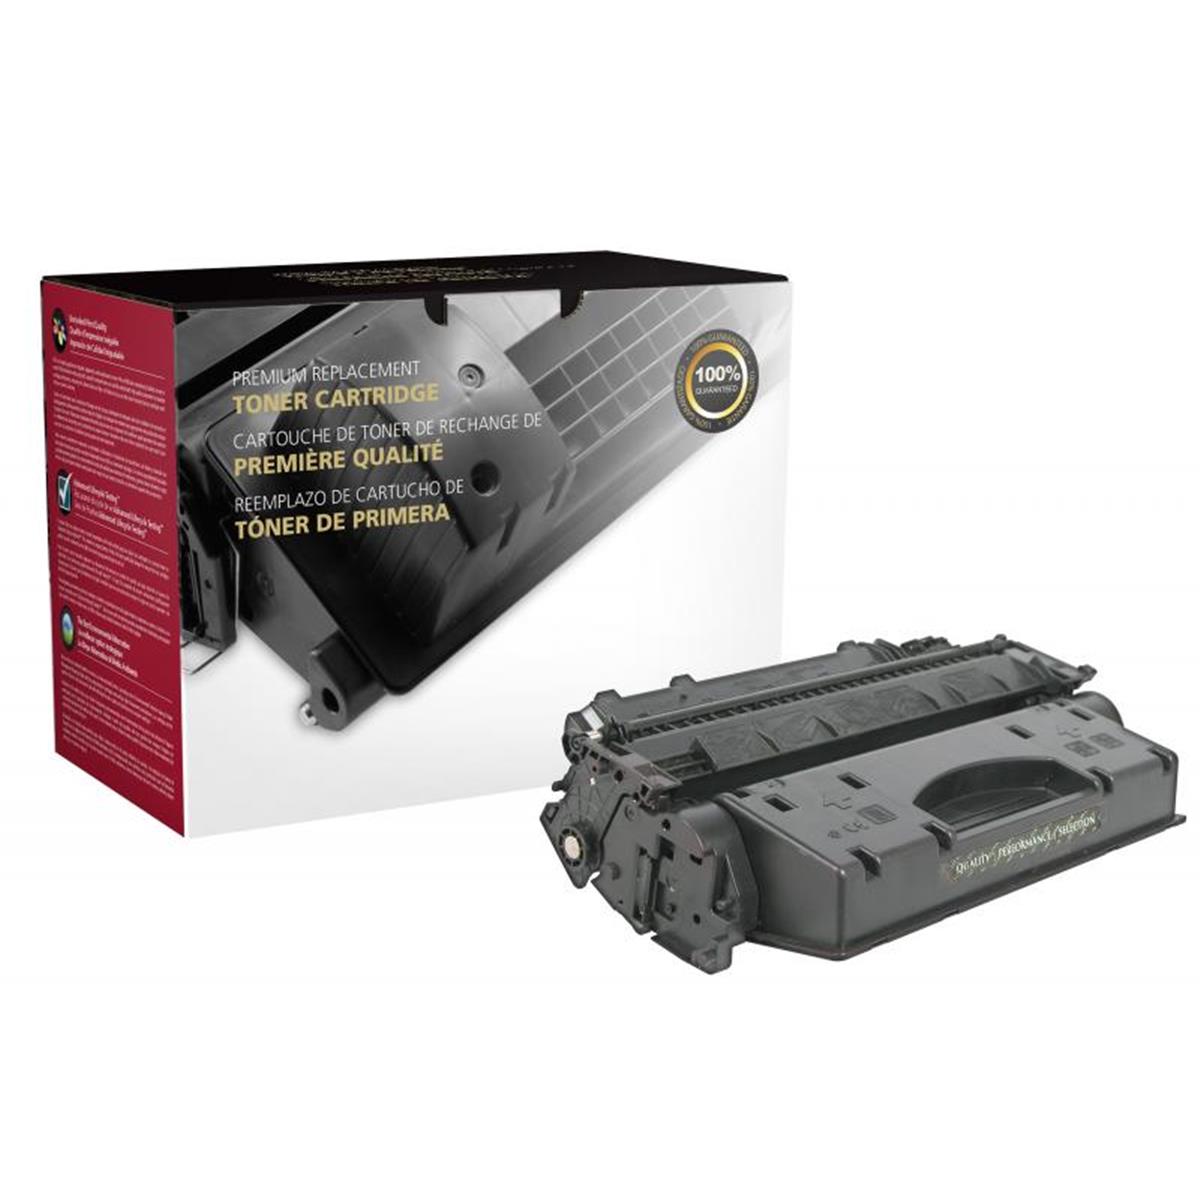 Picture of Canon 200178 Toner Cartridge for Canon 2617B001AA-120